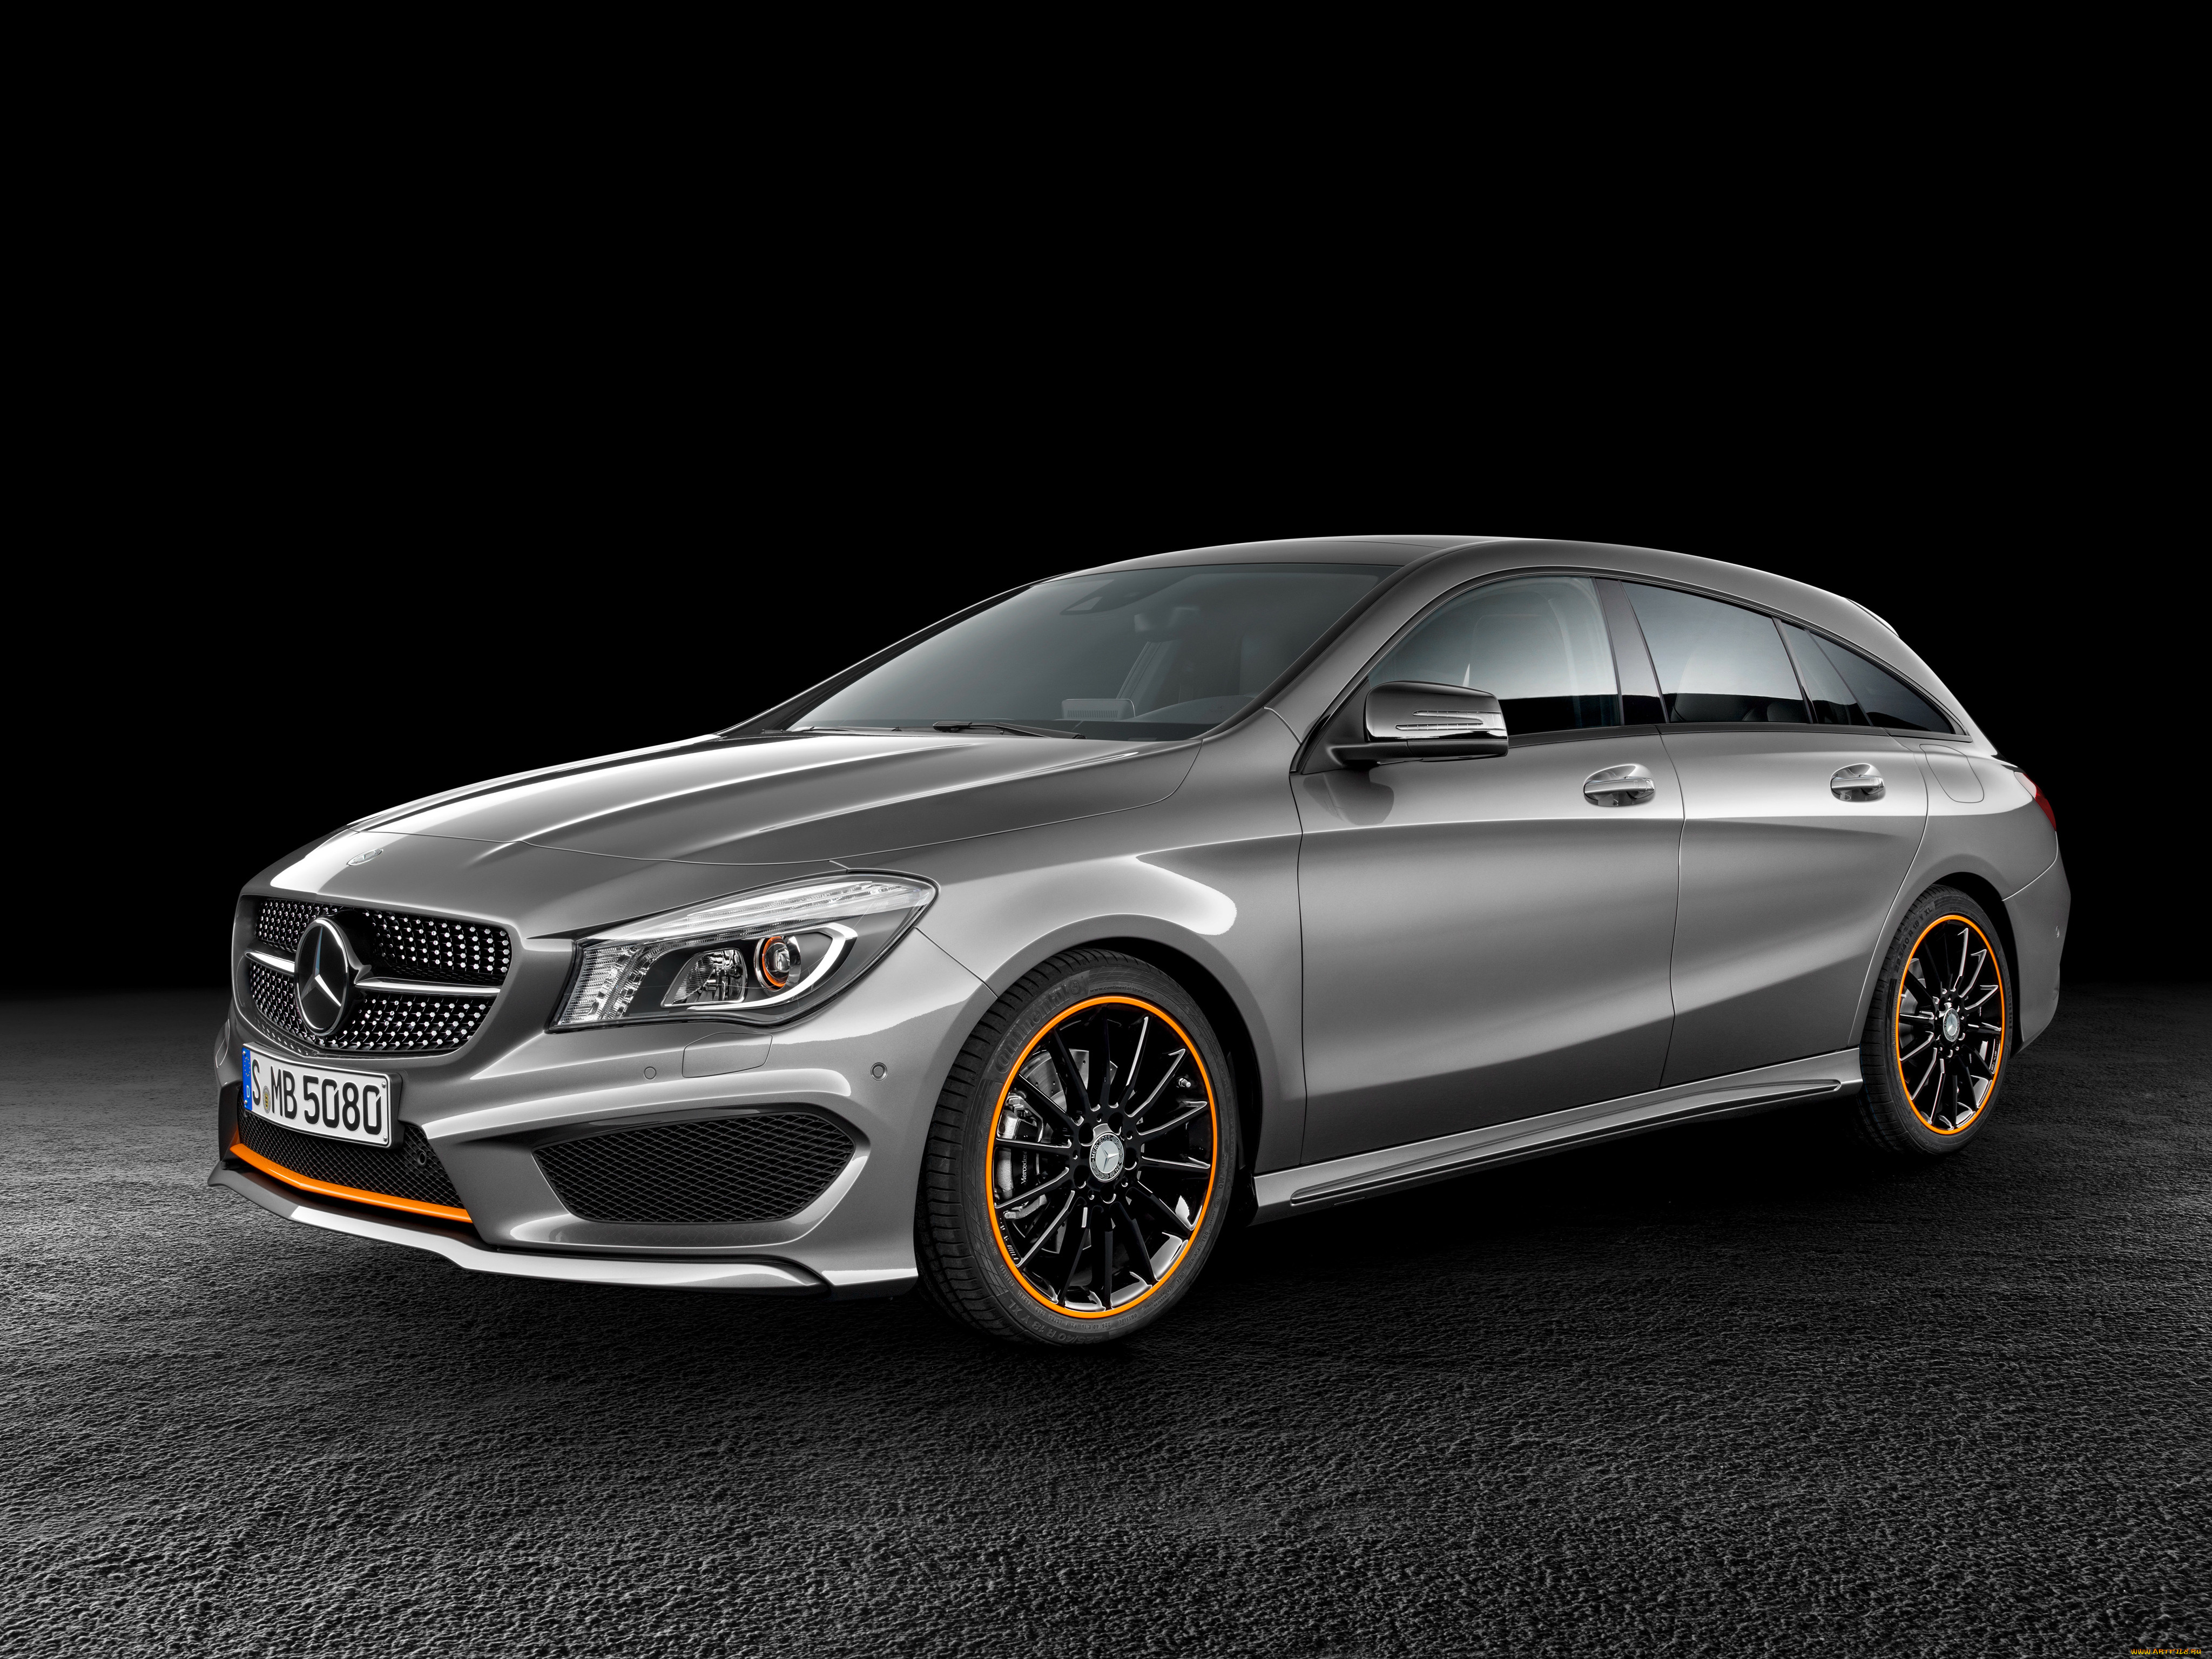 , mercedes-benz, sports, 250, cla, , 2015, x117, package, brake, amg, shooting, 4matic